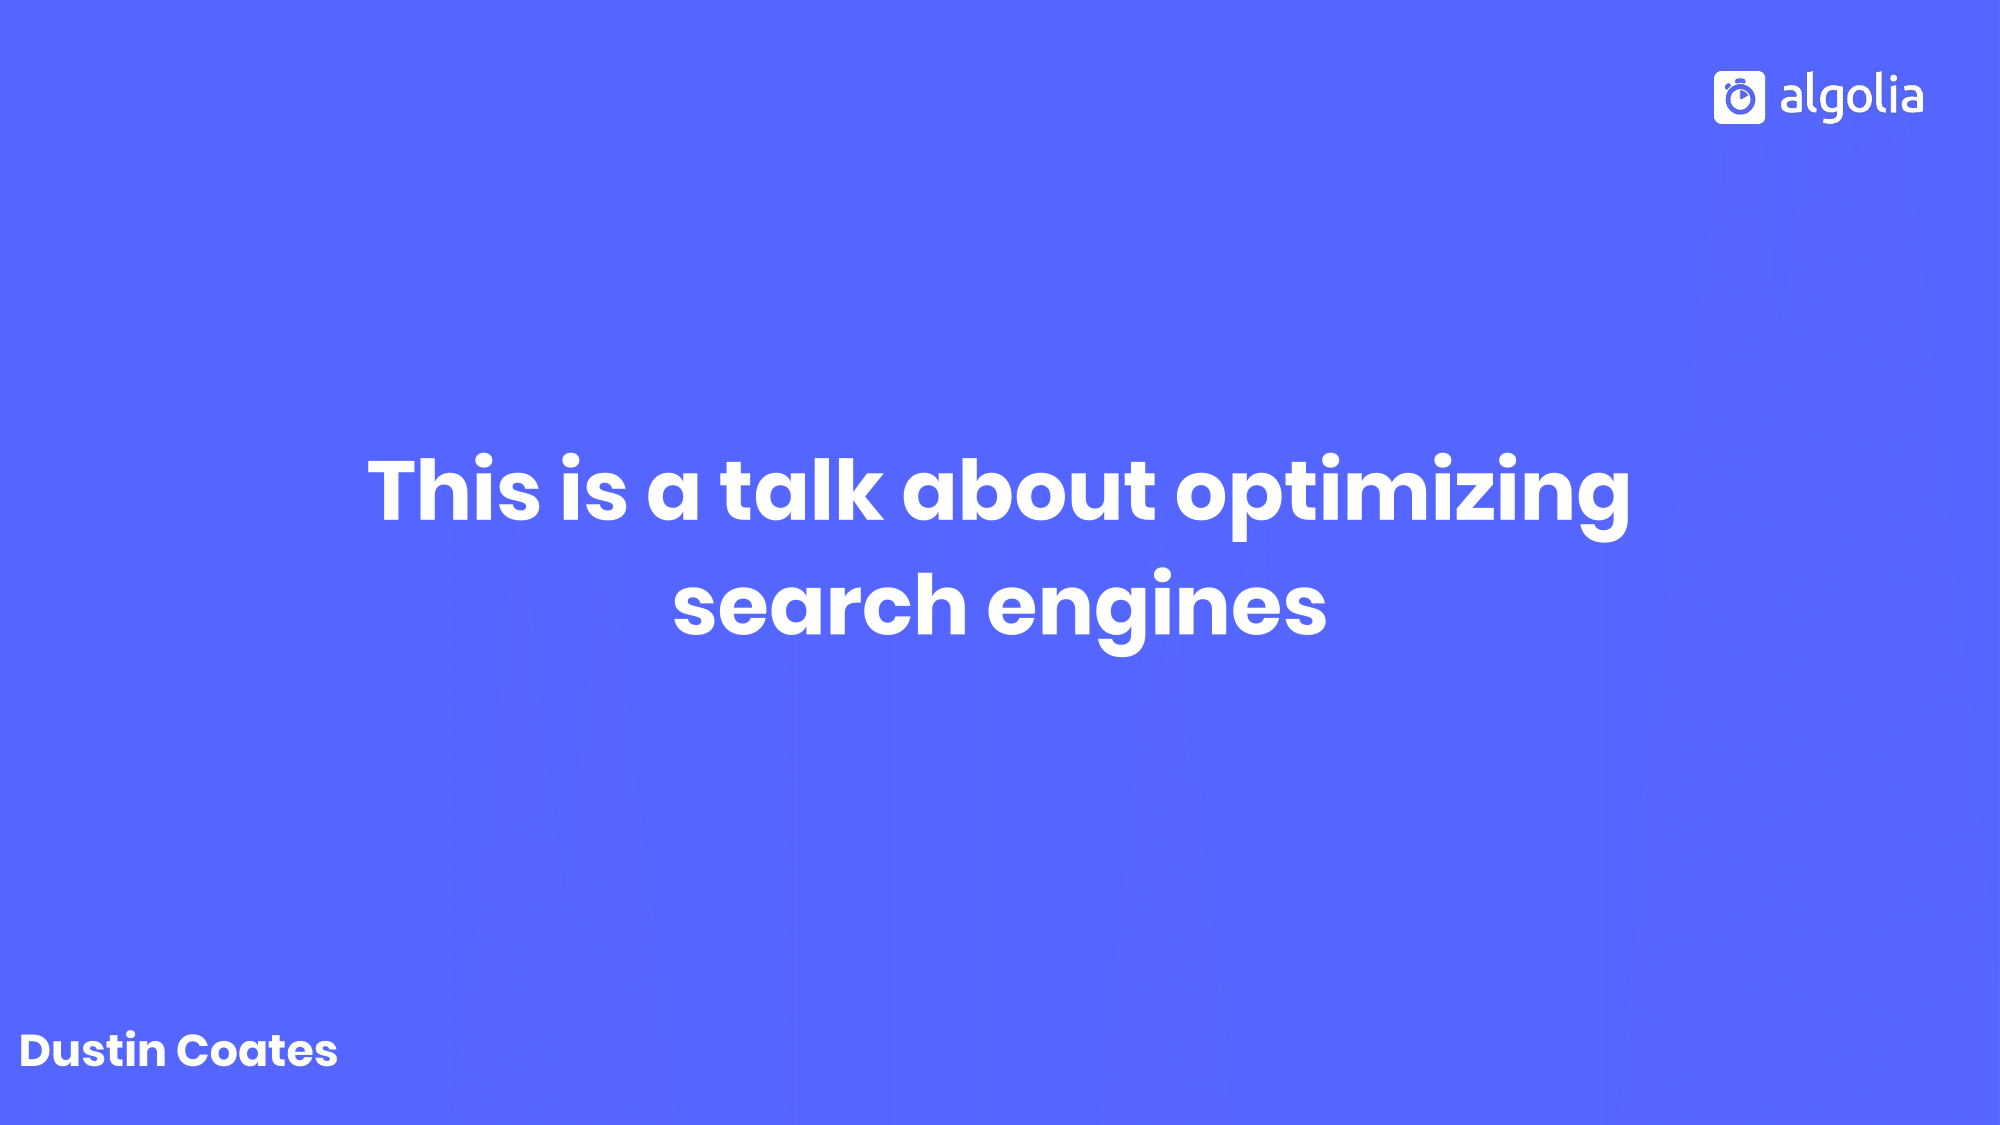 This talk is about optimizing search engines